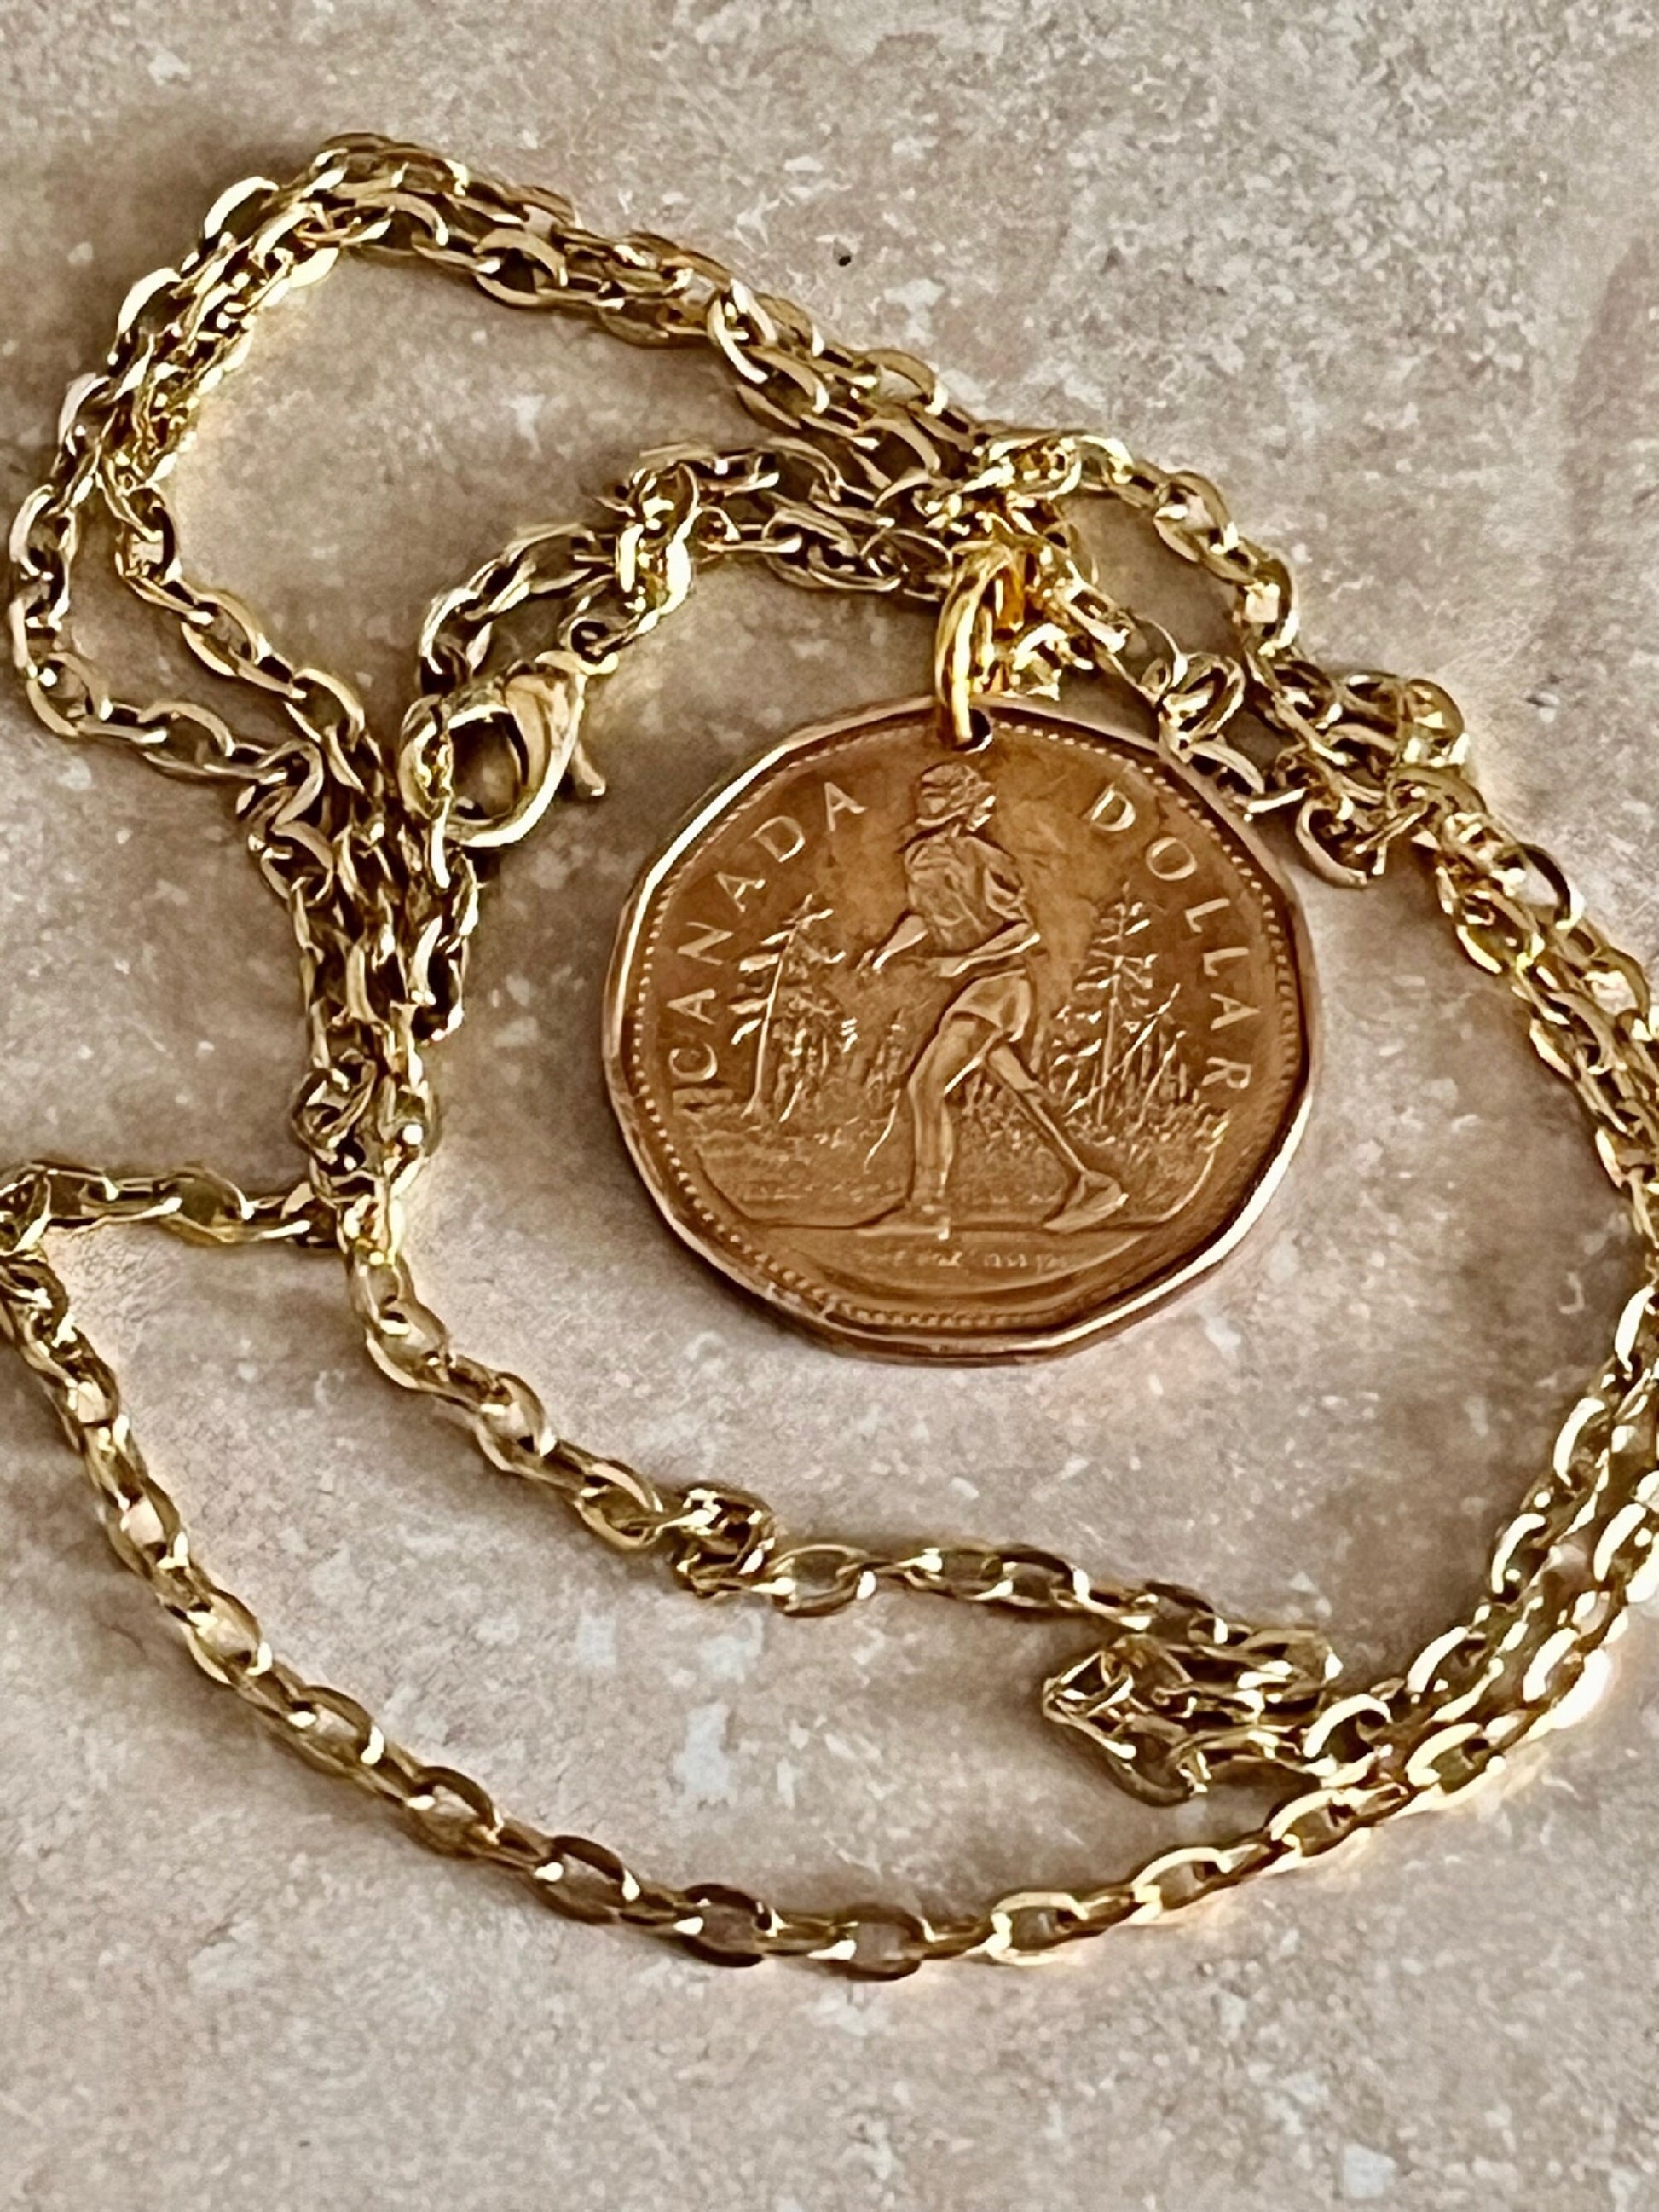 Canada Coin Necklace 2005 Terry Fox Loon Dollar Loonie Personal Vintage Handmade Jewelry Gift Friend Charm For Him Her World Coin Collector